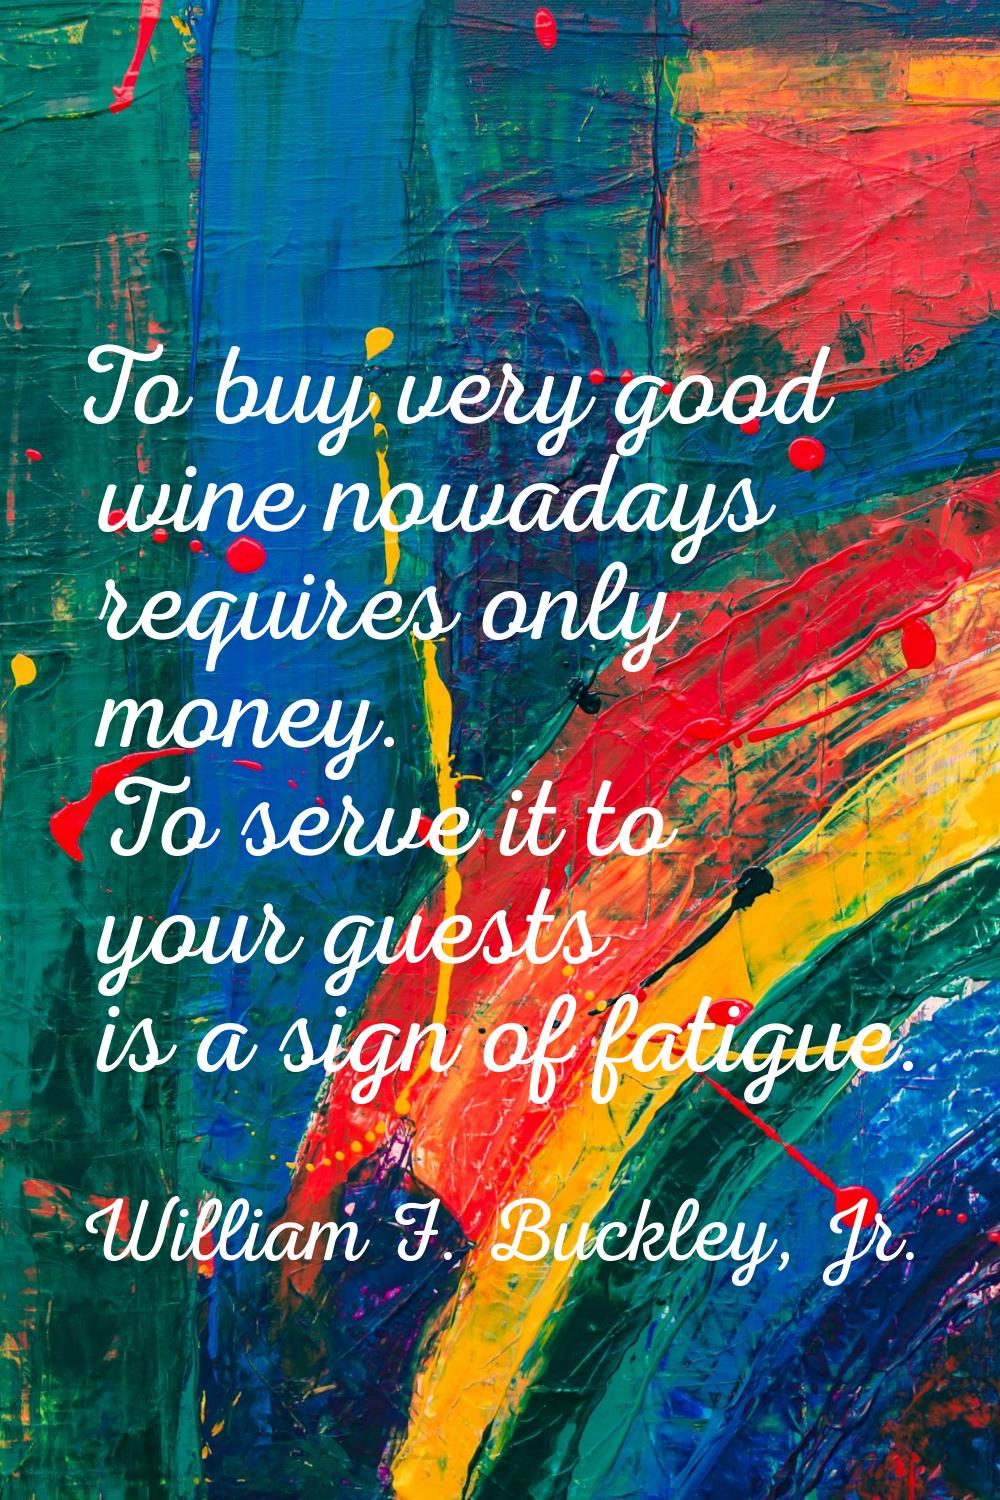 To buy very good wine nowadays requires only money. To serve it to your guests is a sign of fatigue